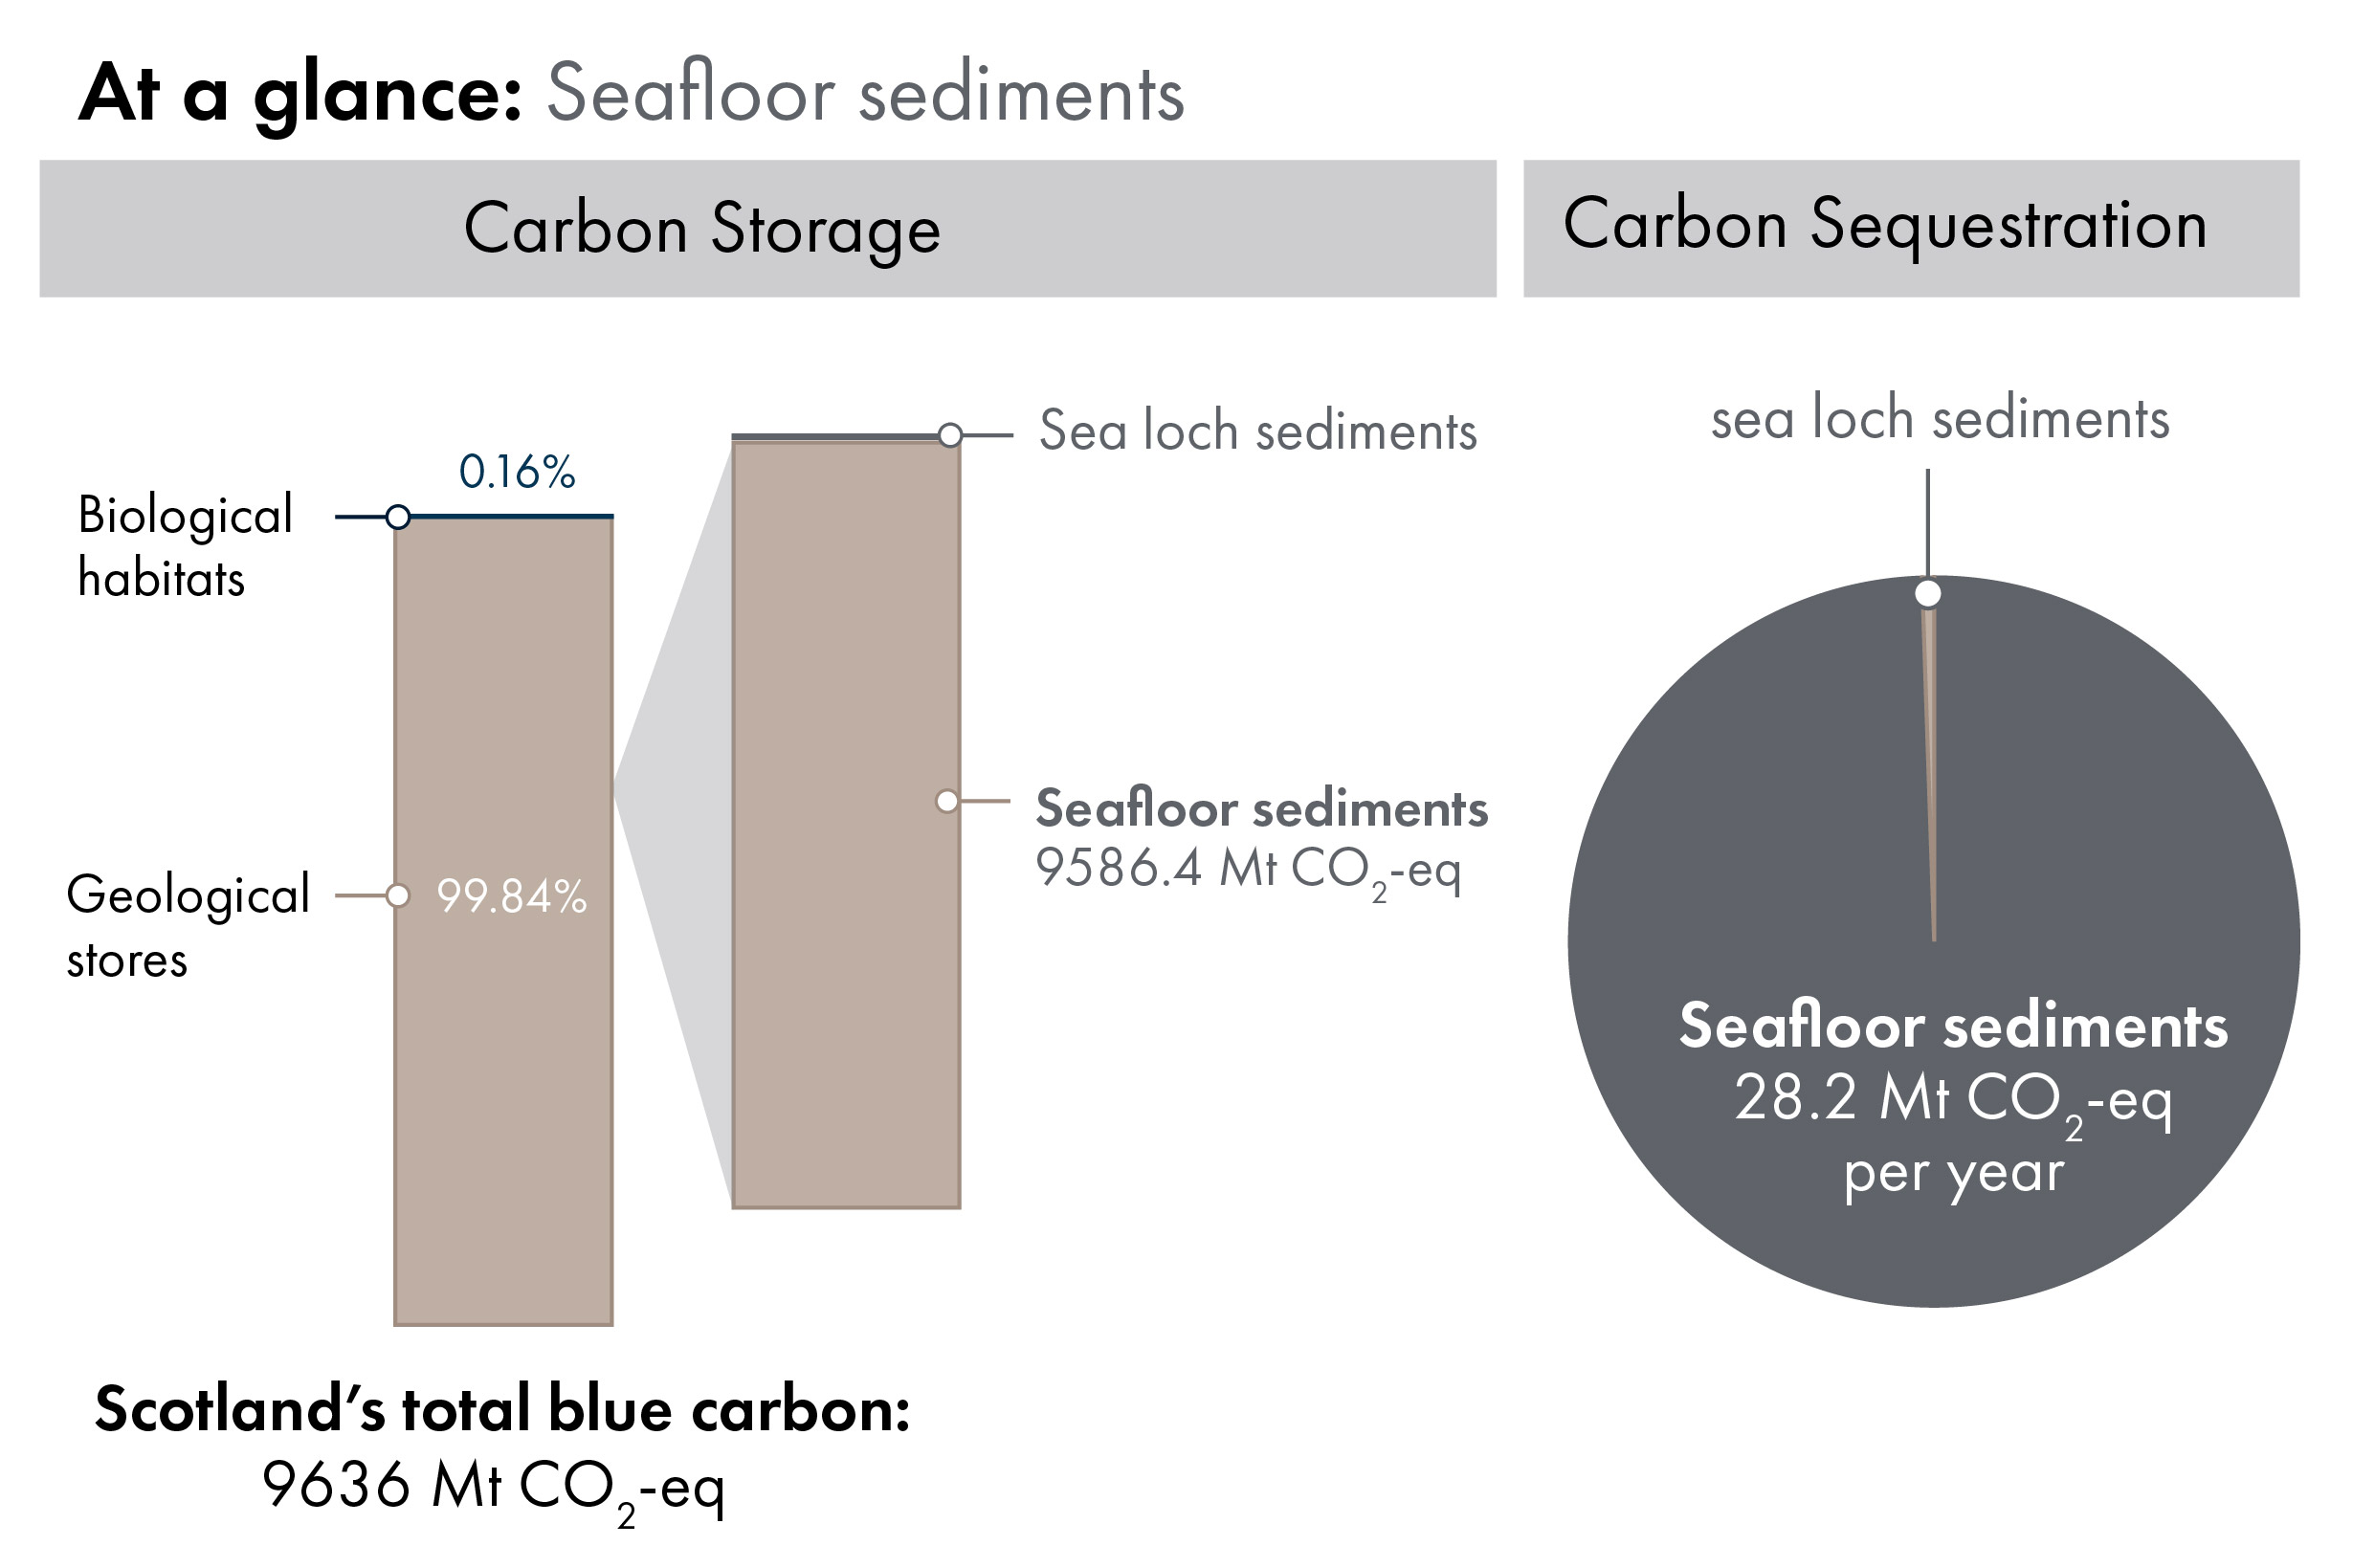 Bar charts showing the proportion of Scotland's blue carbon which is in geological stores (99.84%) versus carbon in biological habitats and species (0.16%). Inset bar chart shows the proportion of carbon in geological stores which is seafloor sediment carbon storage (9,586.4 megatonnes of carbon dioxide equivalent). Pie chart showing, out of all geological stores, the proportion which is sequestered annually by seafloor sediments.